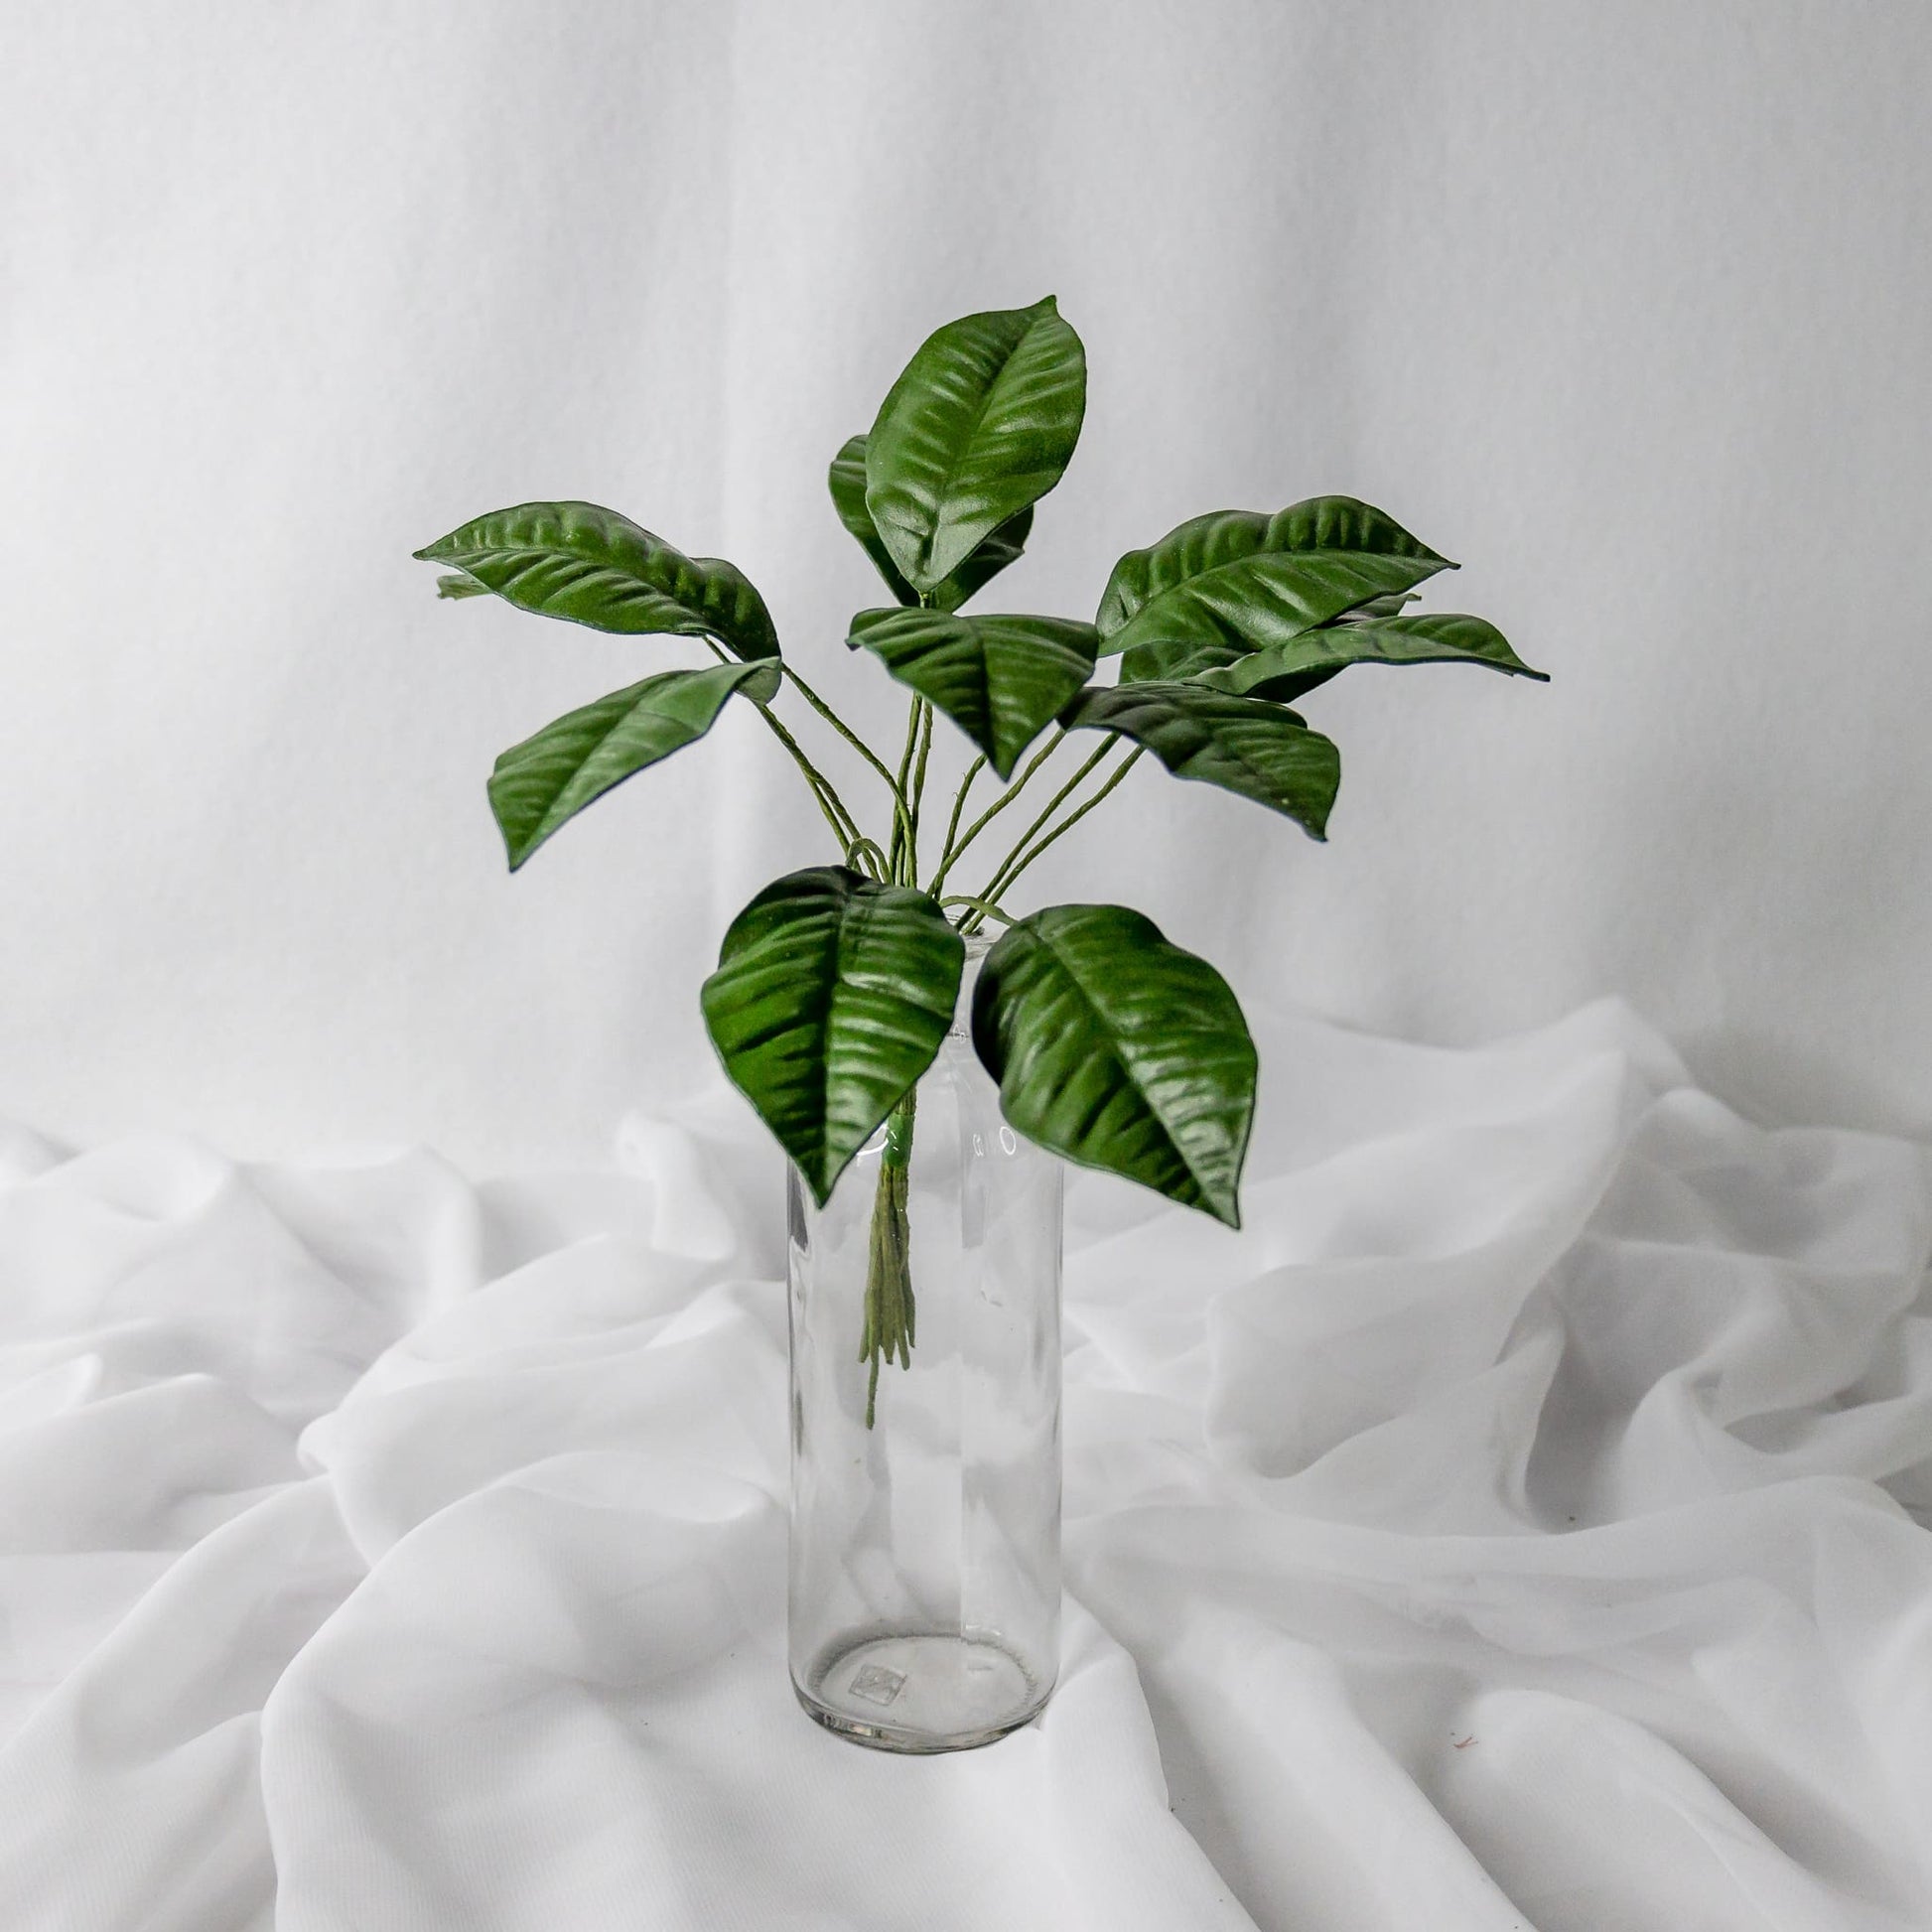 artificial mini gardenia leaves placed in transparent glass vase